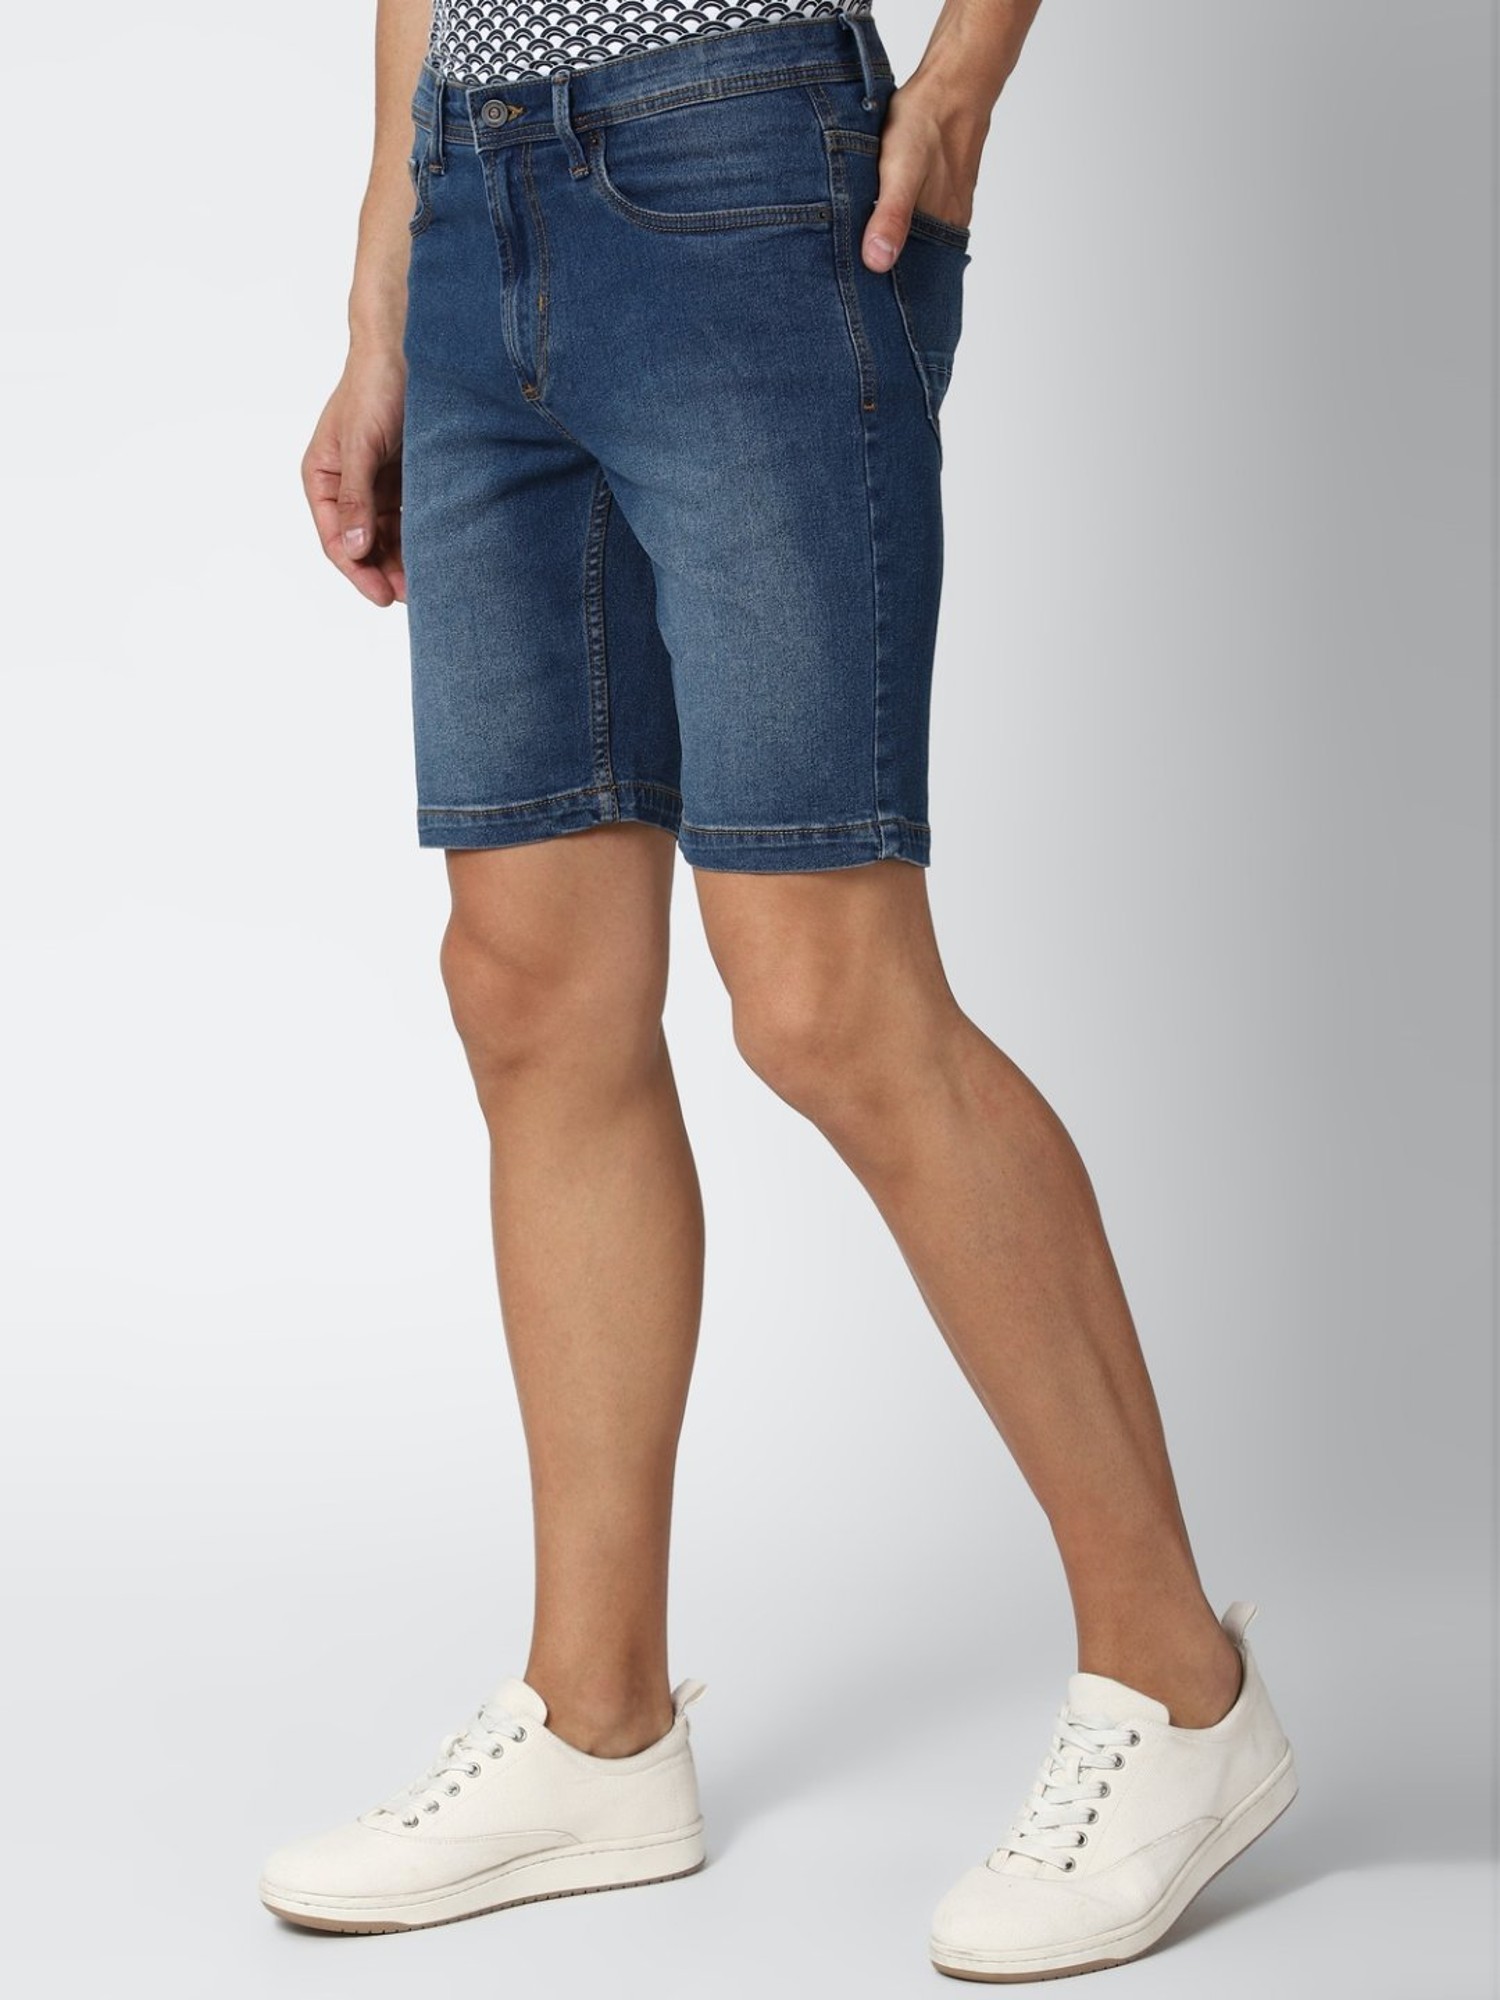 Mens Denim Shorts Feature  Comfortable Easily Washable Pattern  Plain  at Rs 200  Piece in Kadapa